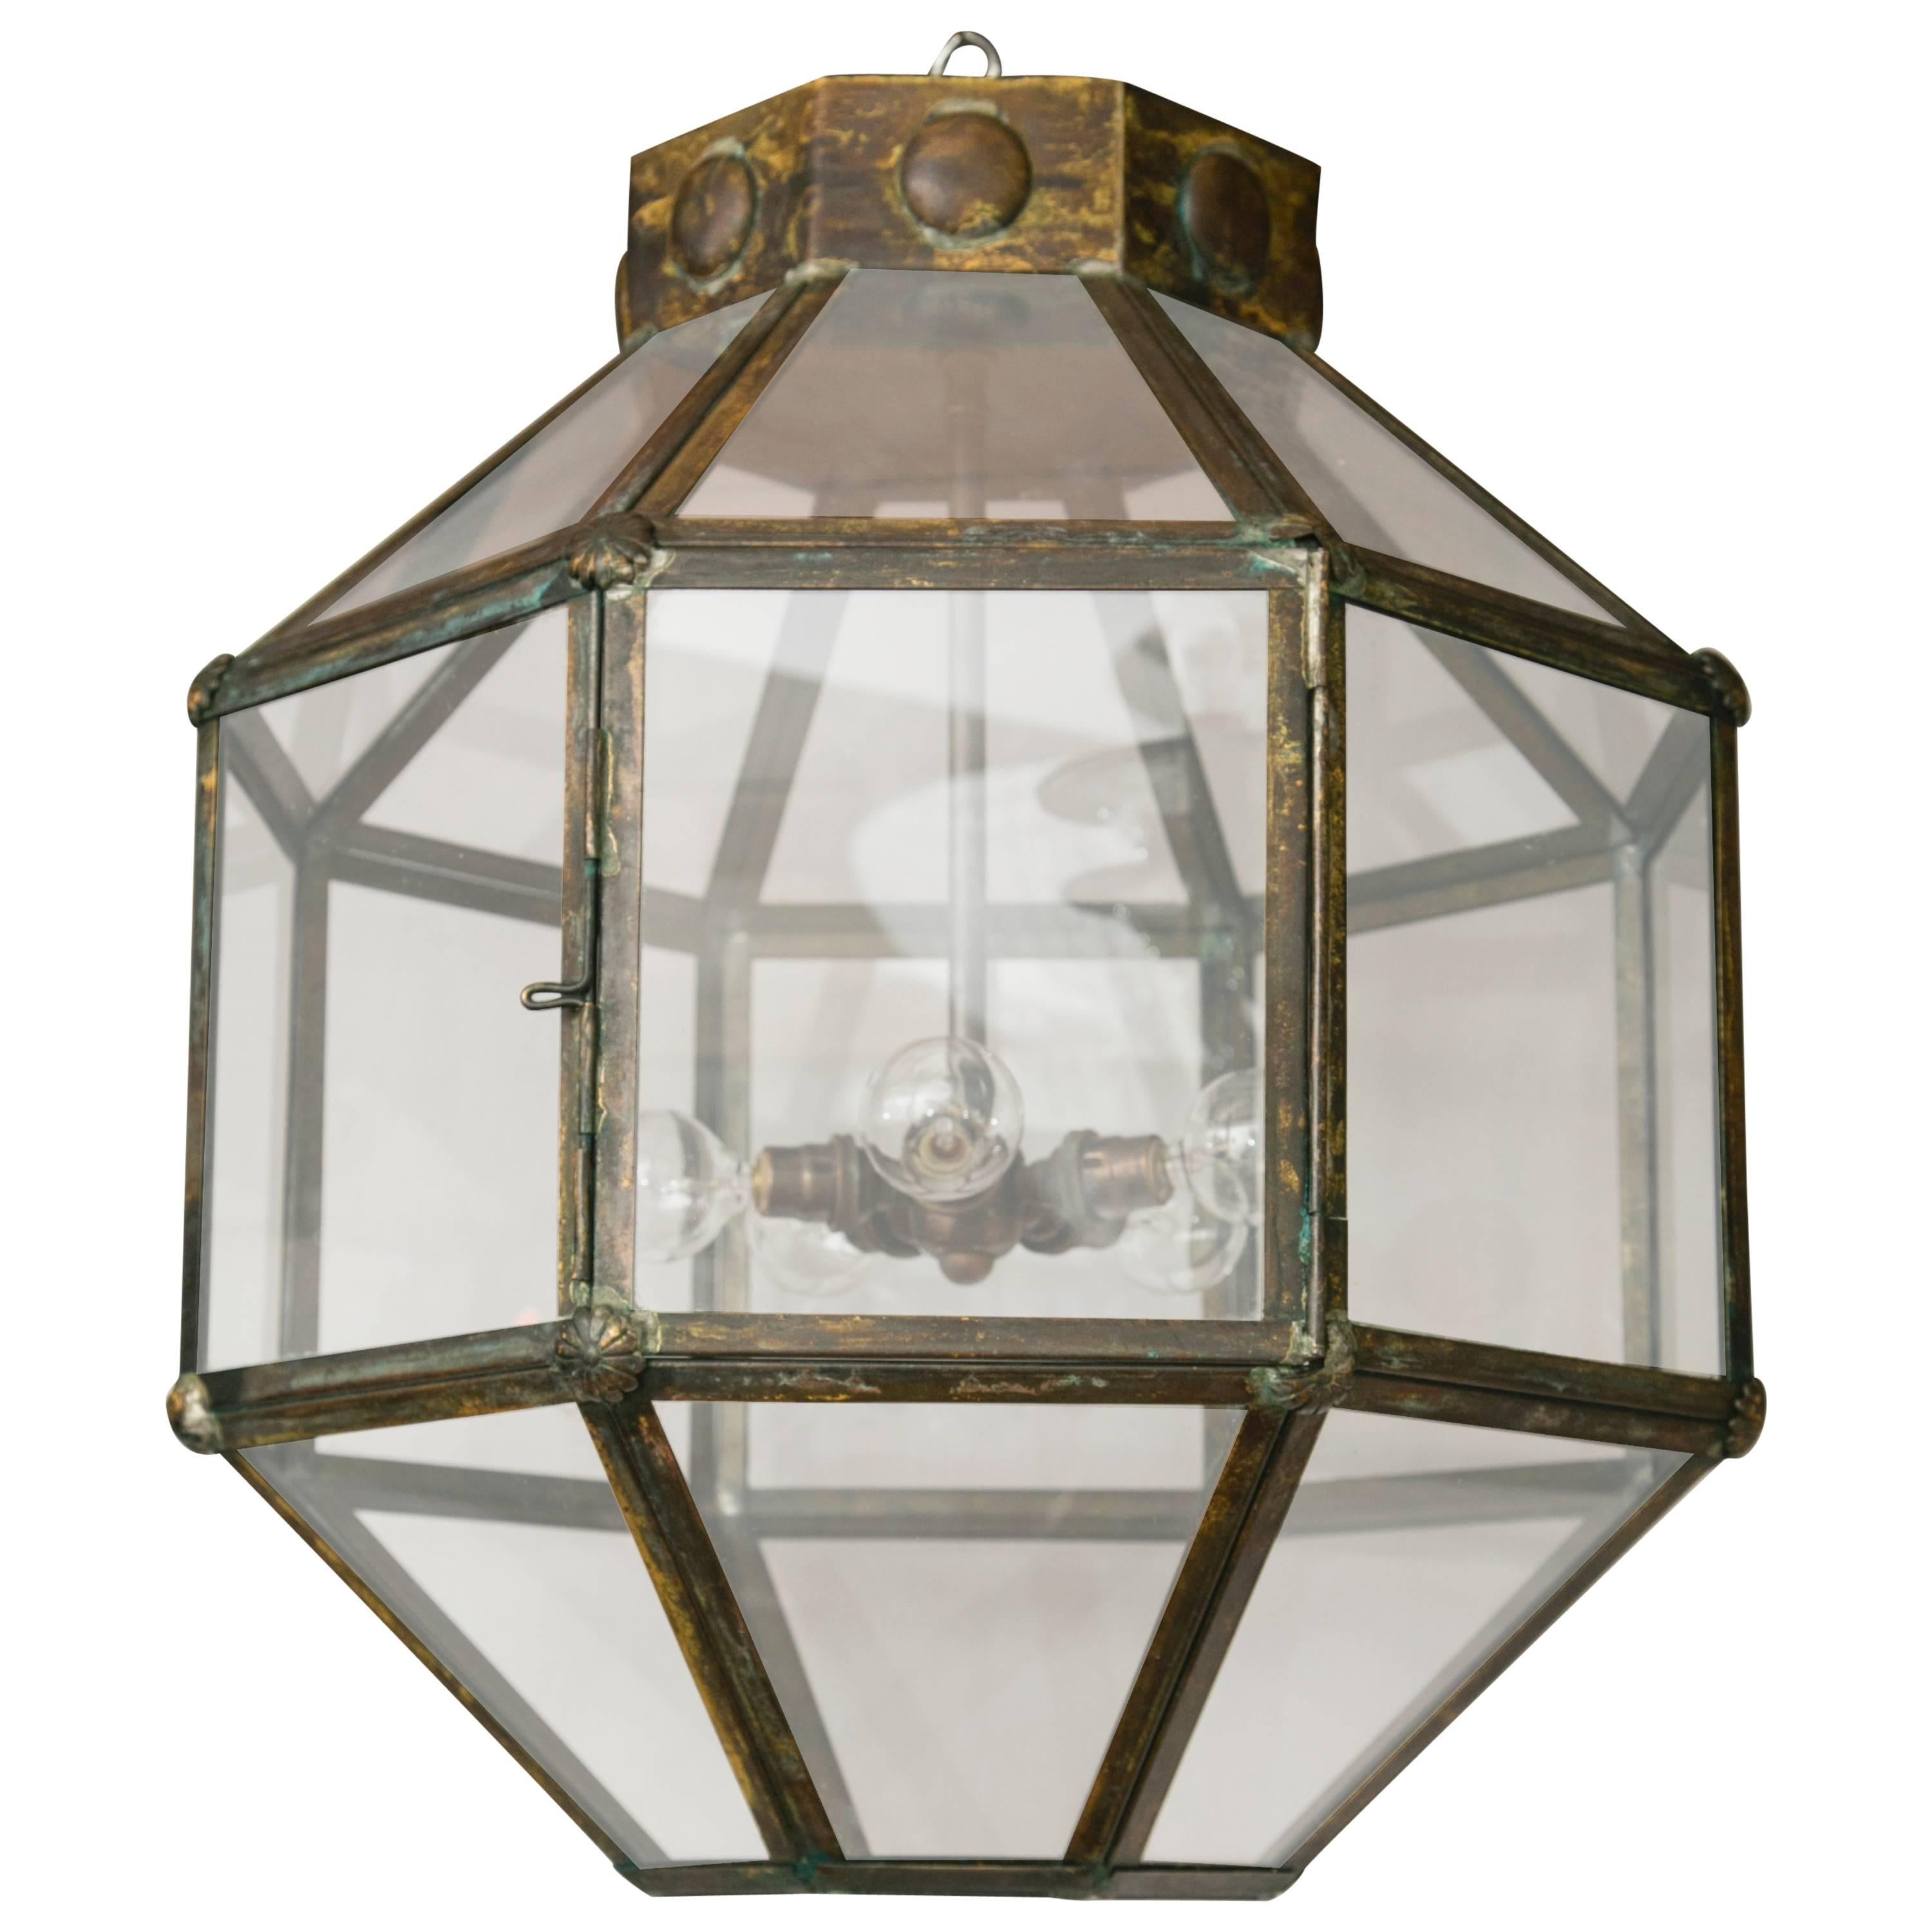 Italian Antiqued Brass Lantern or Multiples Available